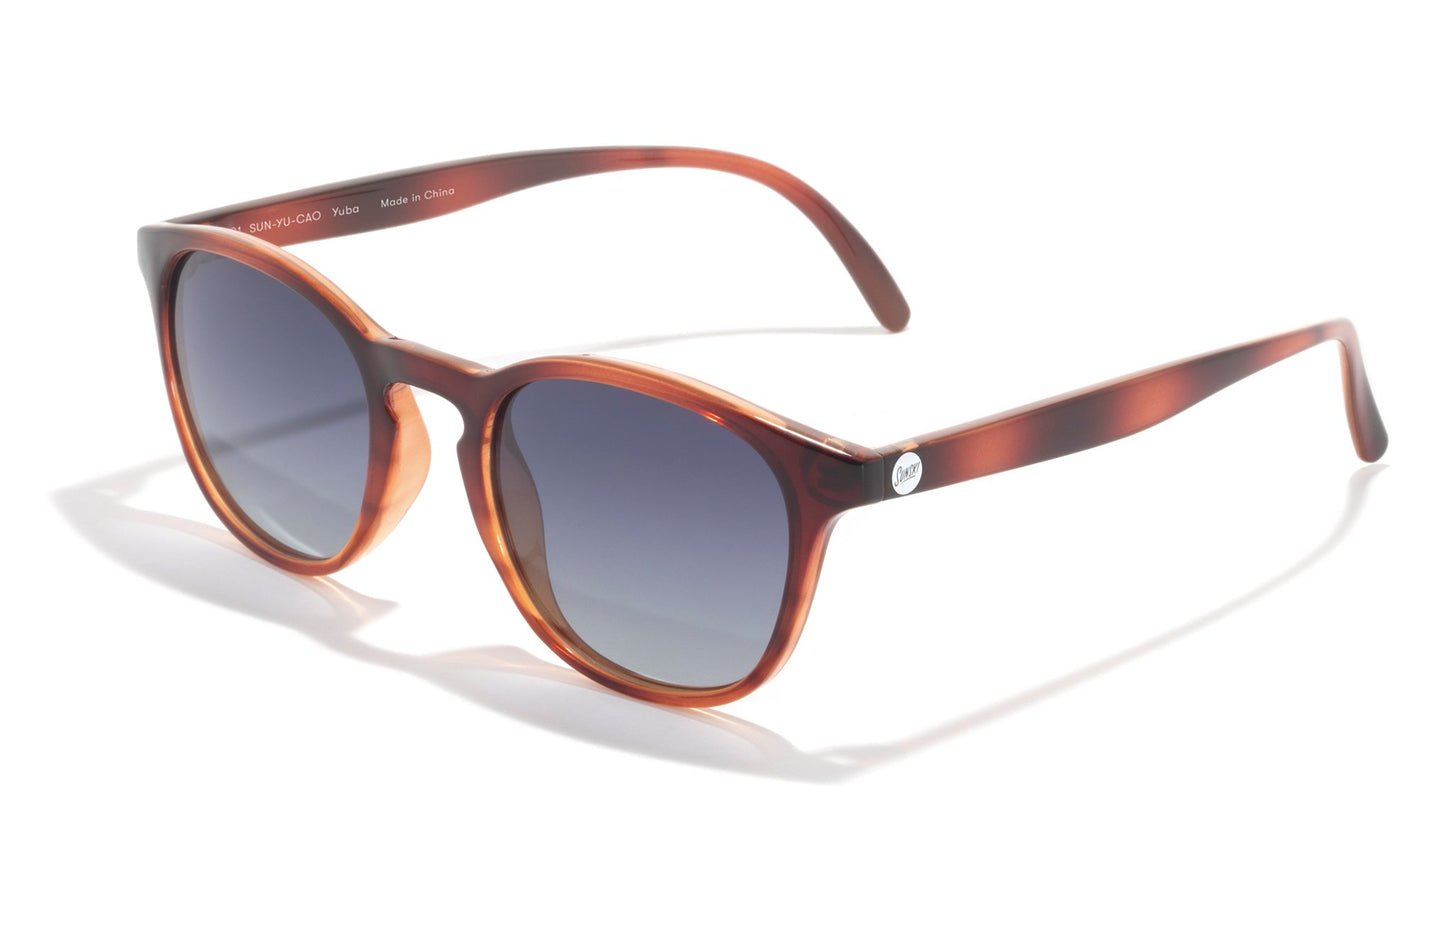 Yuba Polarized Sunglasses in Caramel Ocean by Sunski - eco friendly sunglasses made from recycled plastic, polarized lenses, and a perfect fit make these a customer favorite. Lifetime Warranty through Sunski.